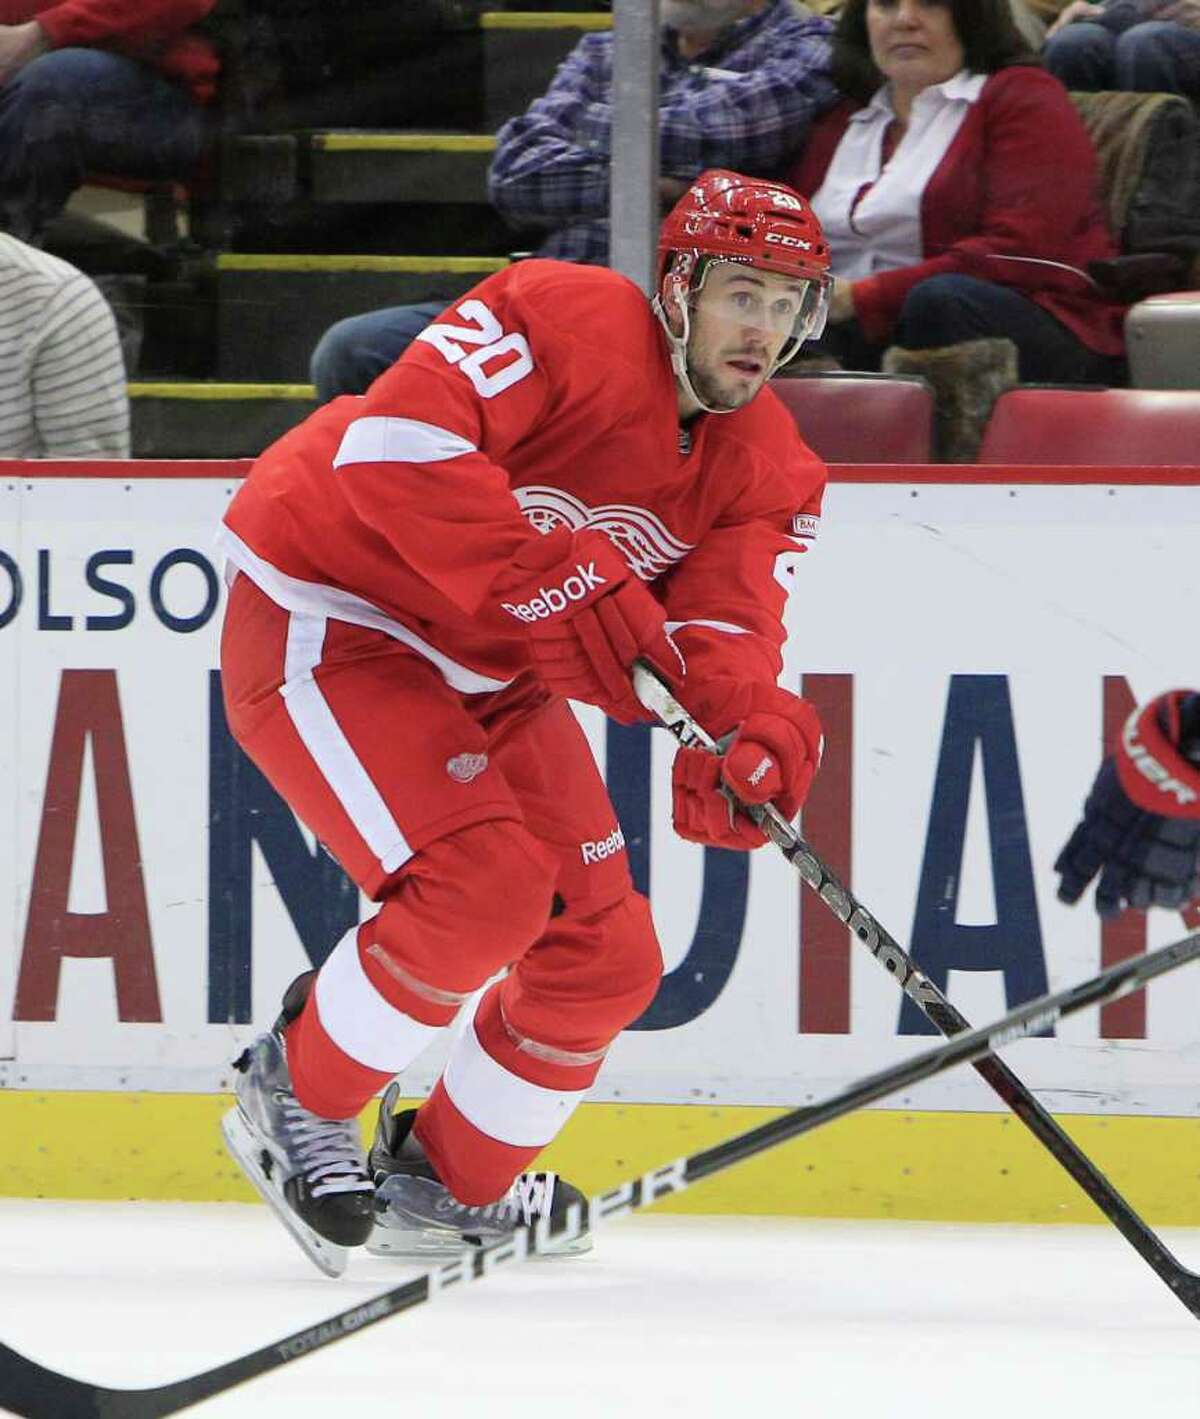 Detroit Red Wings left wing Drew Miller (20) skates during the first period of an NHL hockey game against the Columbus Blue Jackets in Detroit, Saturday, Jan. 21, 2012. (AP Photo/Carlos Osorio)